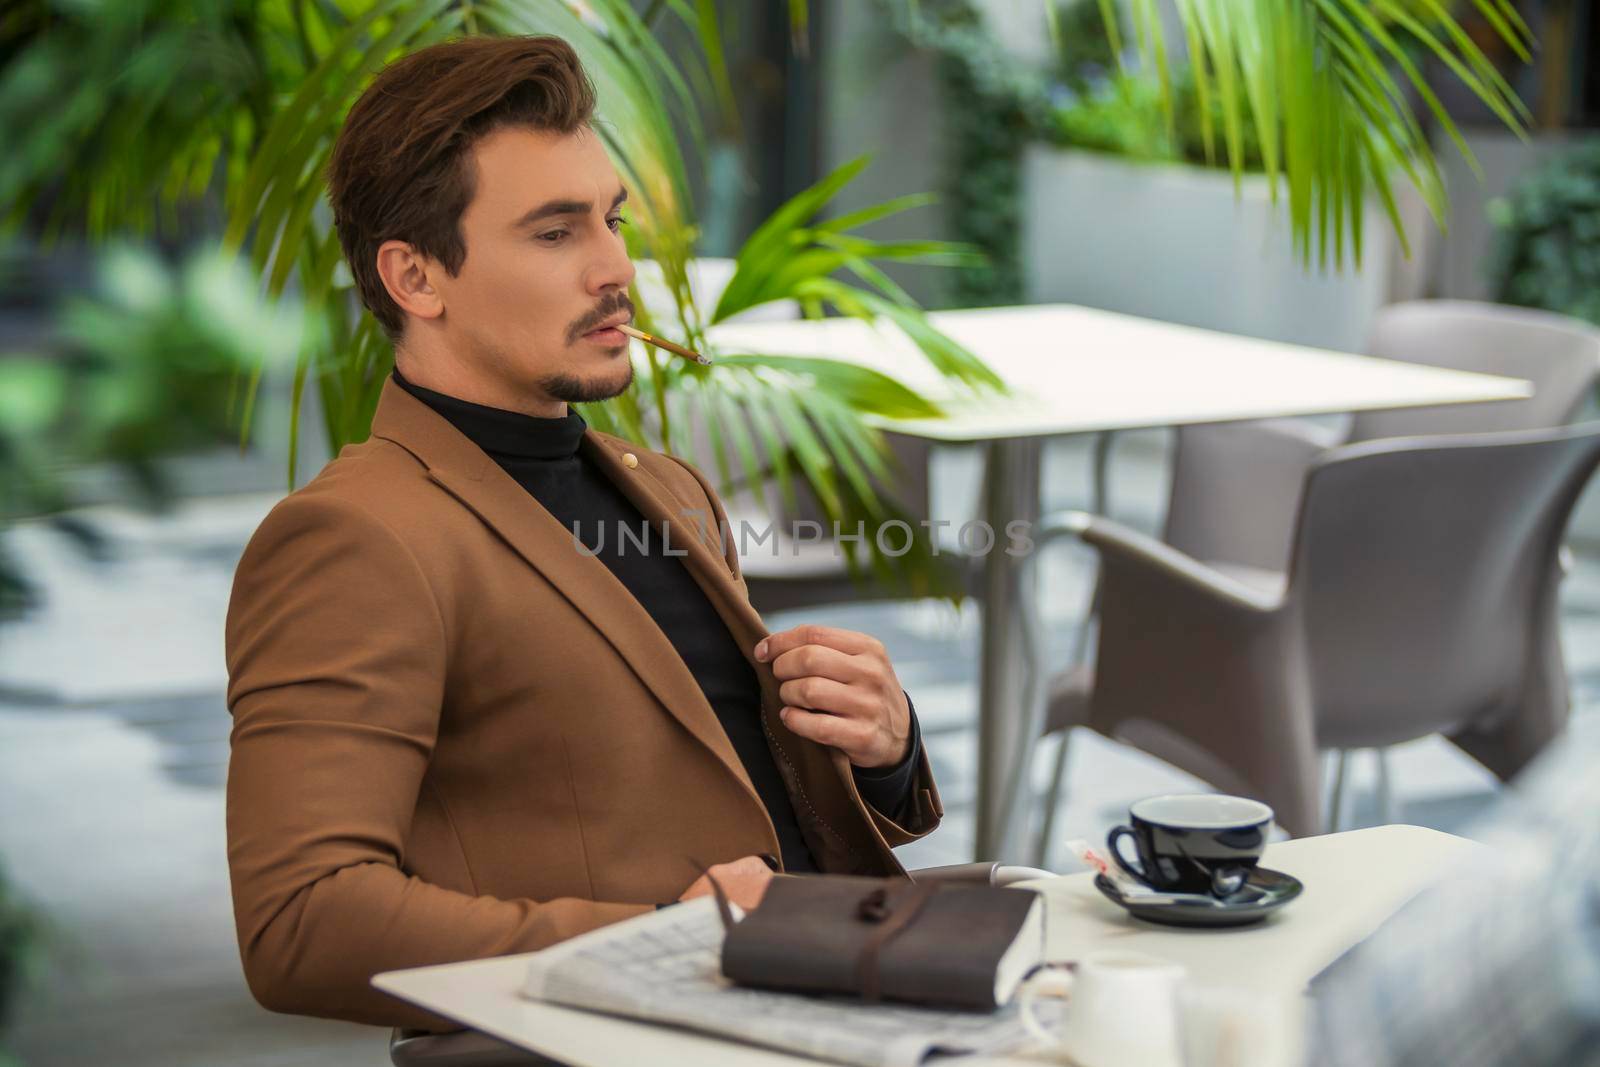 a man in a business suit sits at a table and smokes